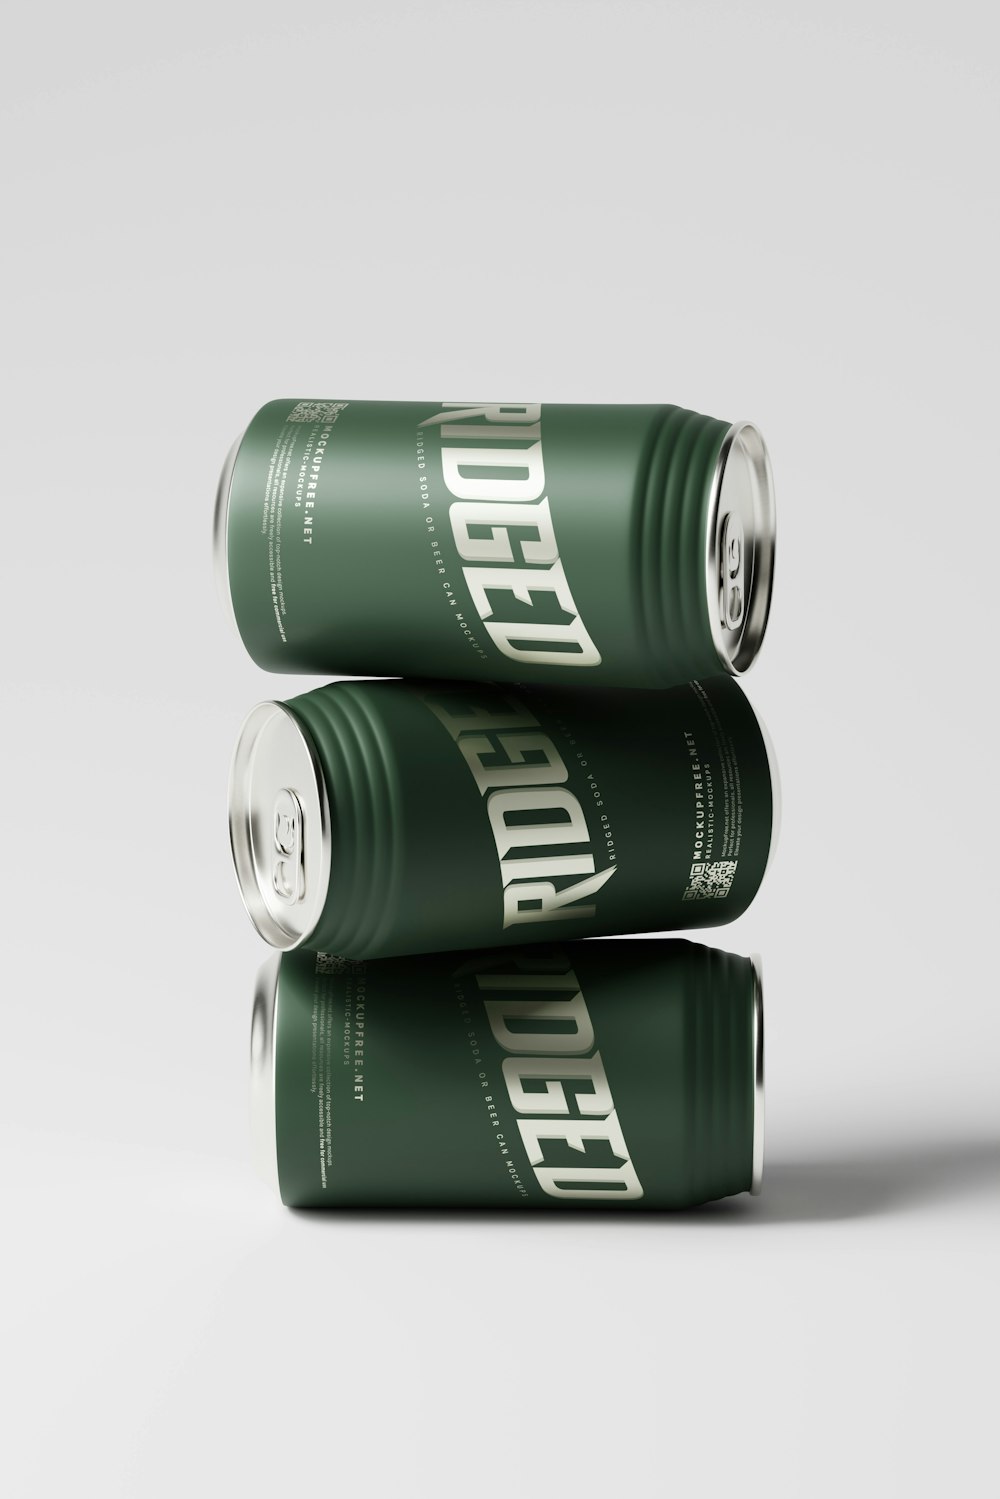 two cans of beer sitting on top of each other